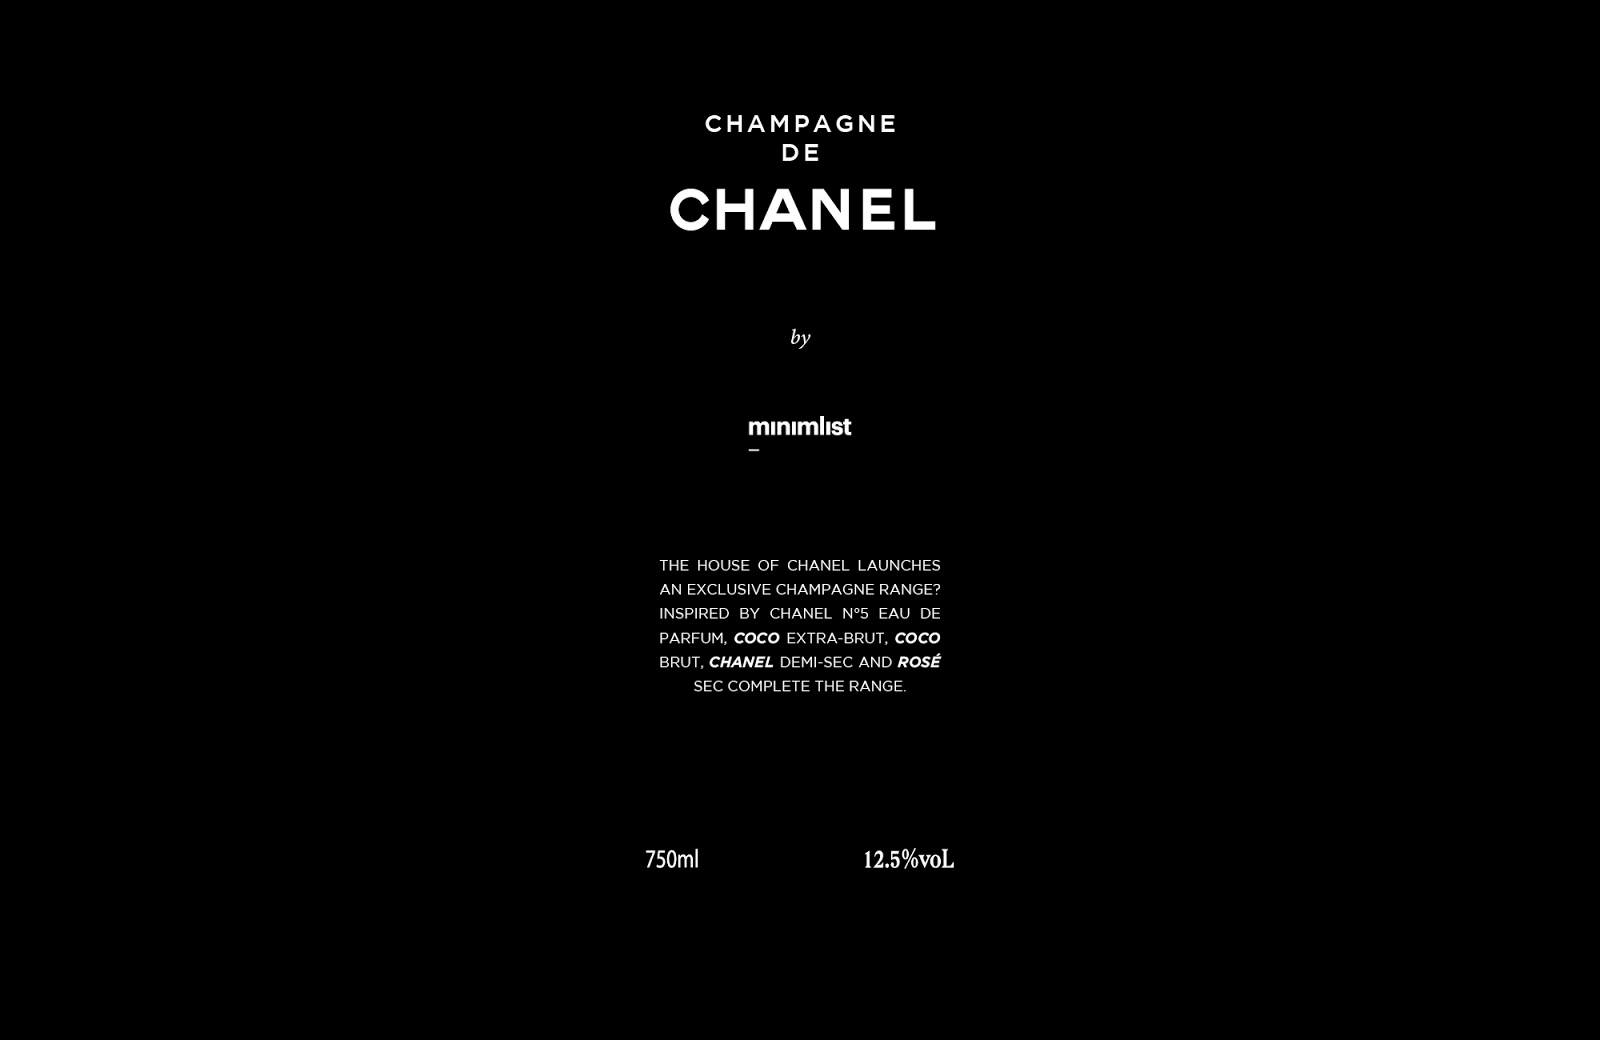 Champagne de CHANEL – Packaging Of The World